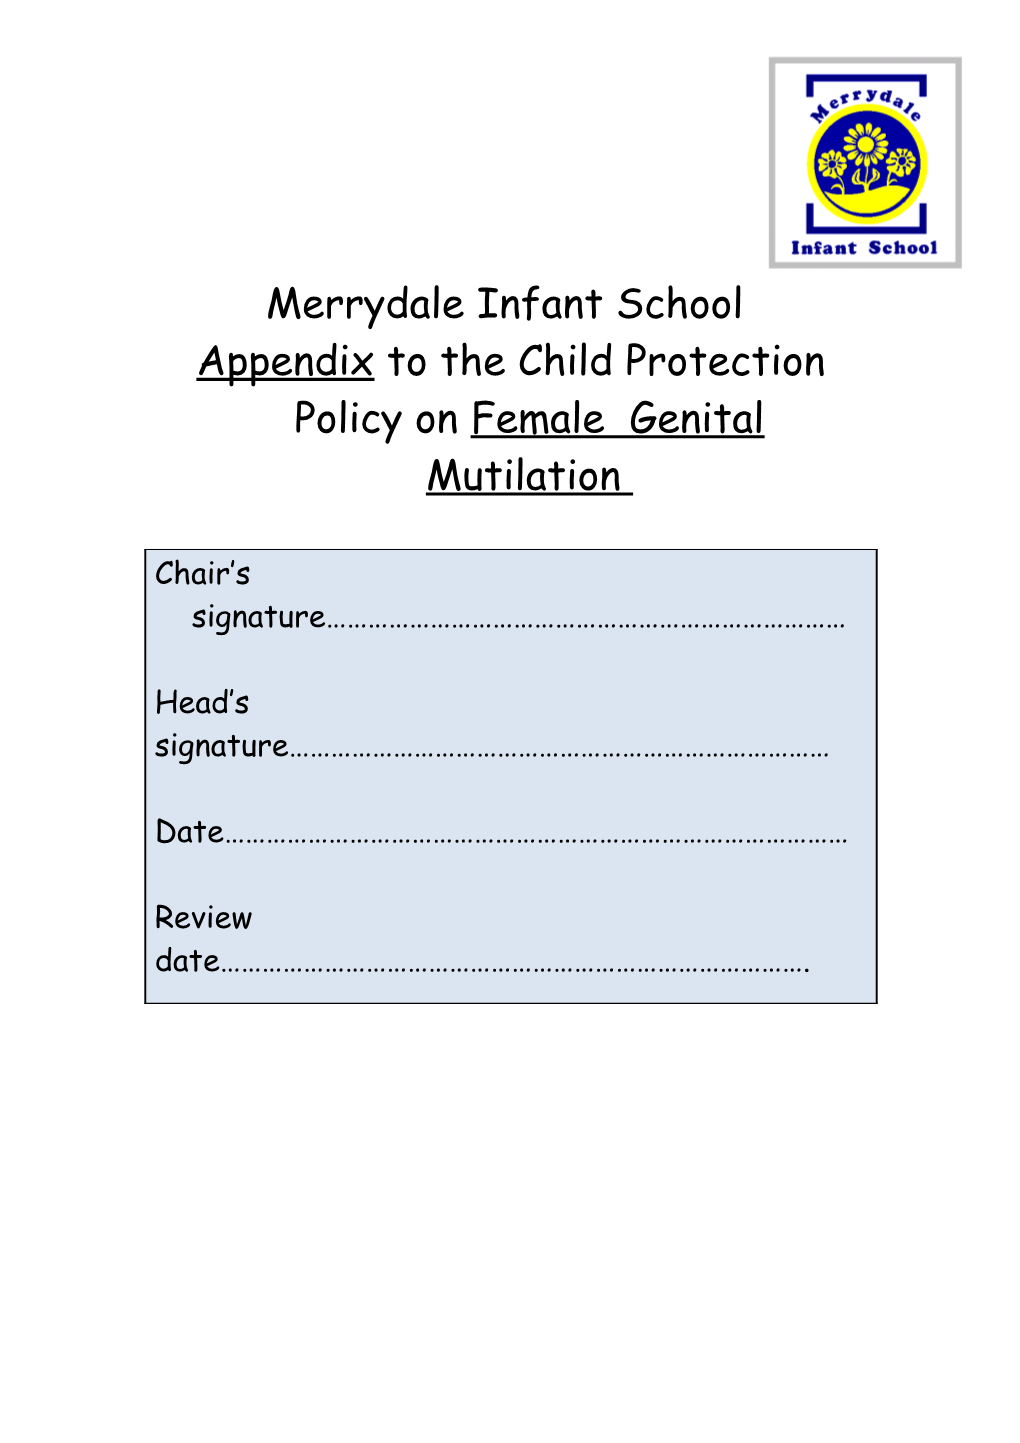 Appendix to the Child Protection Policy Onfemale Genital Mutilation